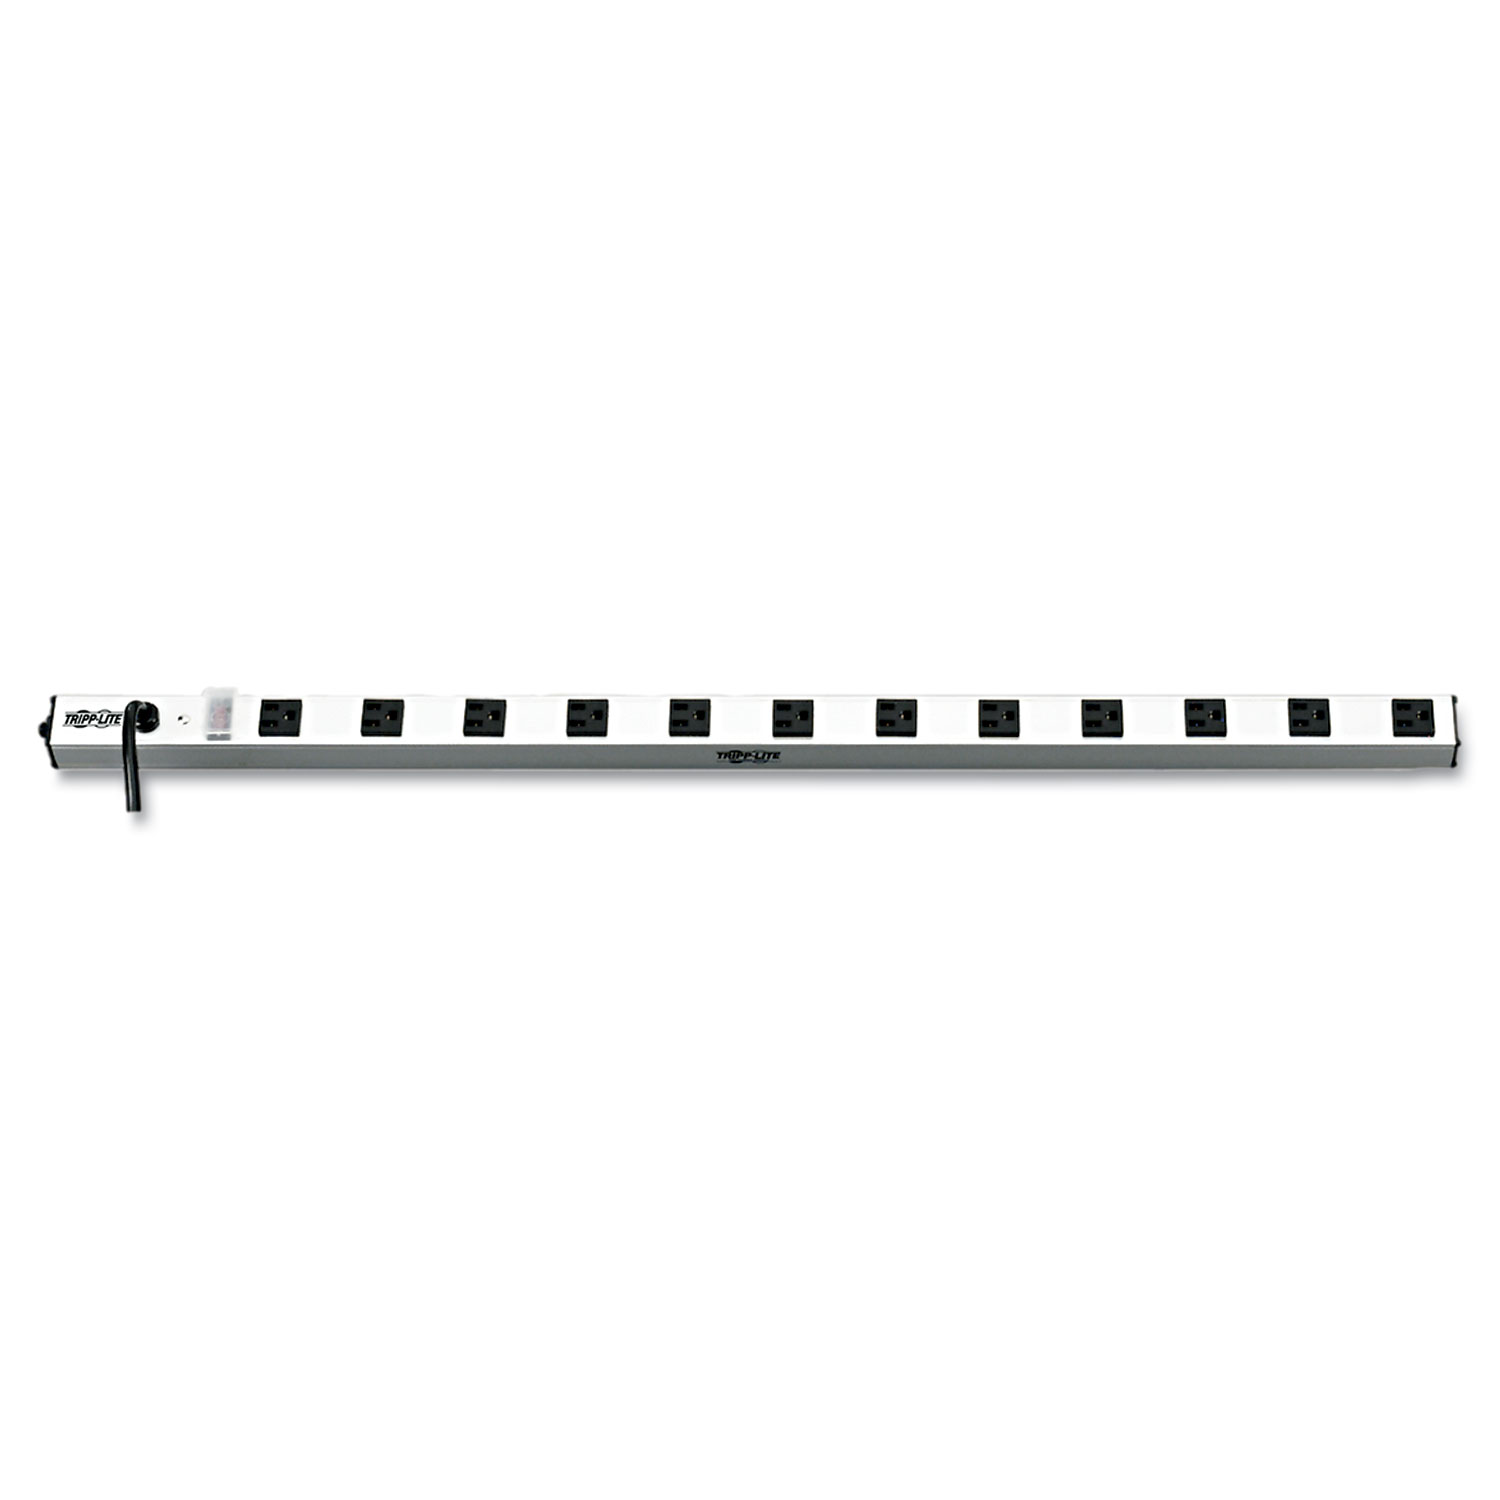  Tripp Lite PS3612 Vertical Power Strip, 12 Outlets, 15 ft. Cord, 36 Length (TRPPS3612) 